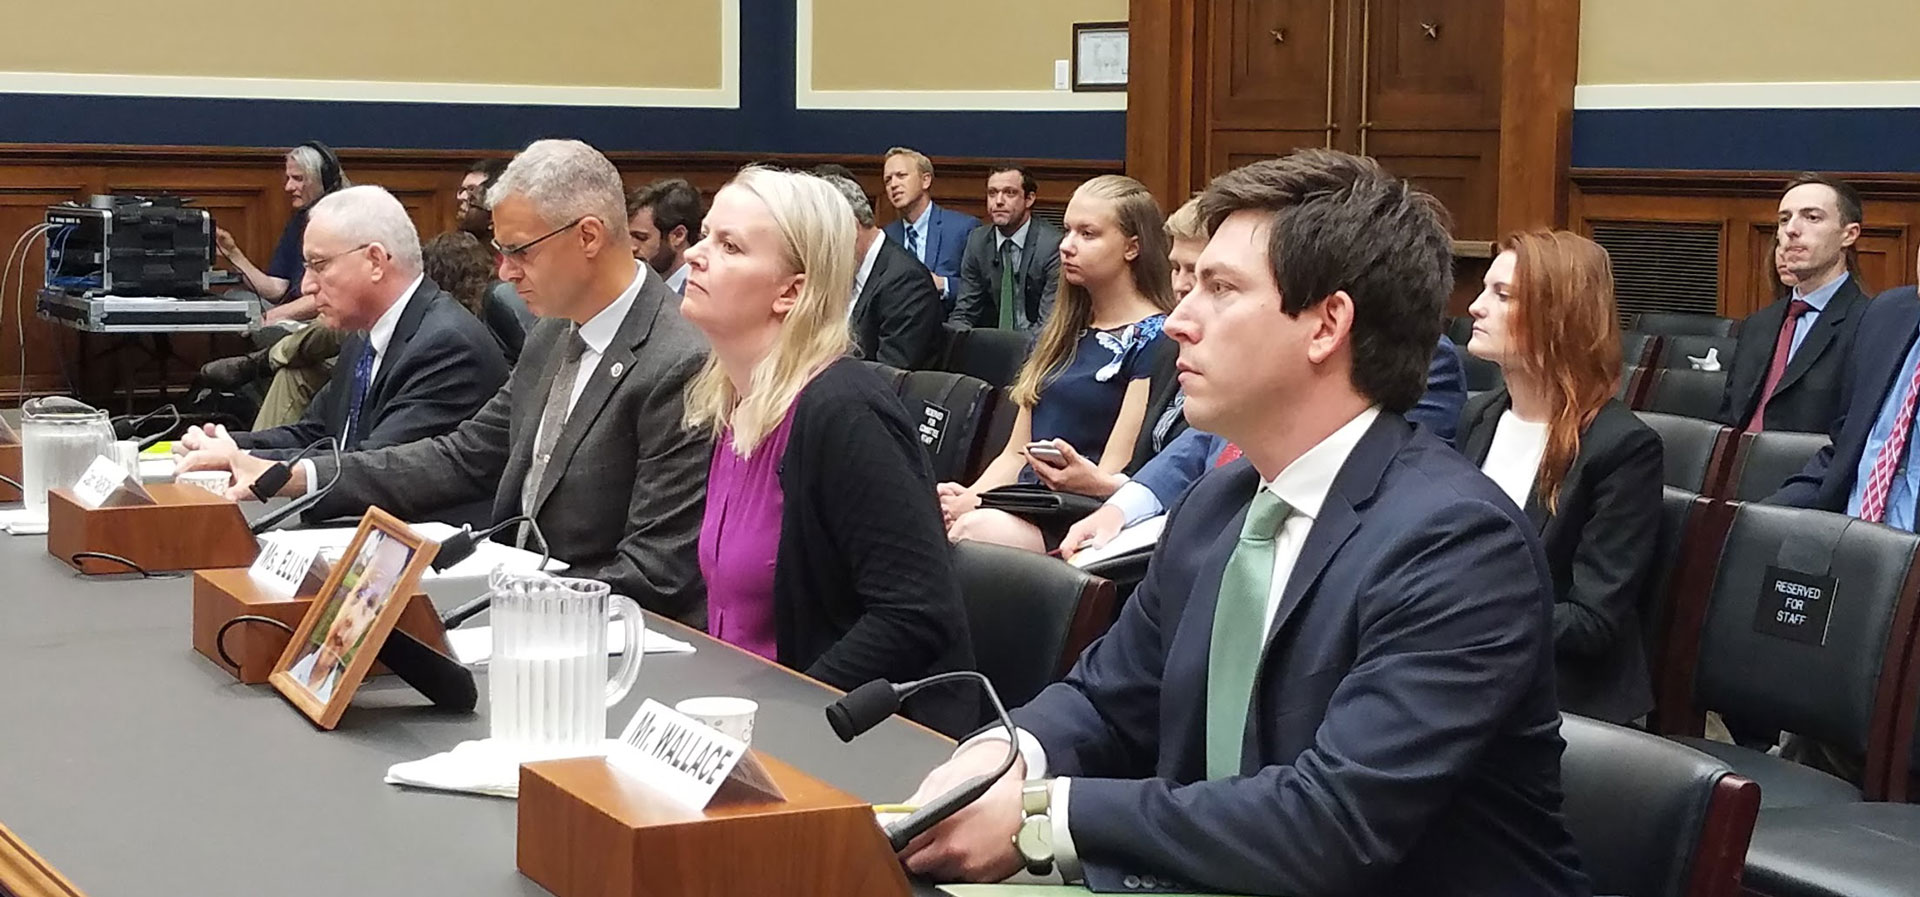 Crystal Ellis, center, testified in front of congress on June 13, on what wouuld have been Camden's 7th birthday, about the importance of passing the STURDY Act. From left, Charles A. Samuels, lawyer; Chris Parsons, Minnesota Professional Fire Fighters; Ellis; and William Wallace, Consumer Reports.